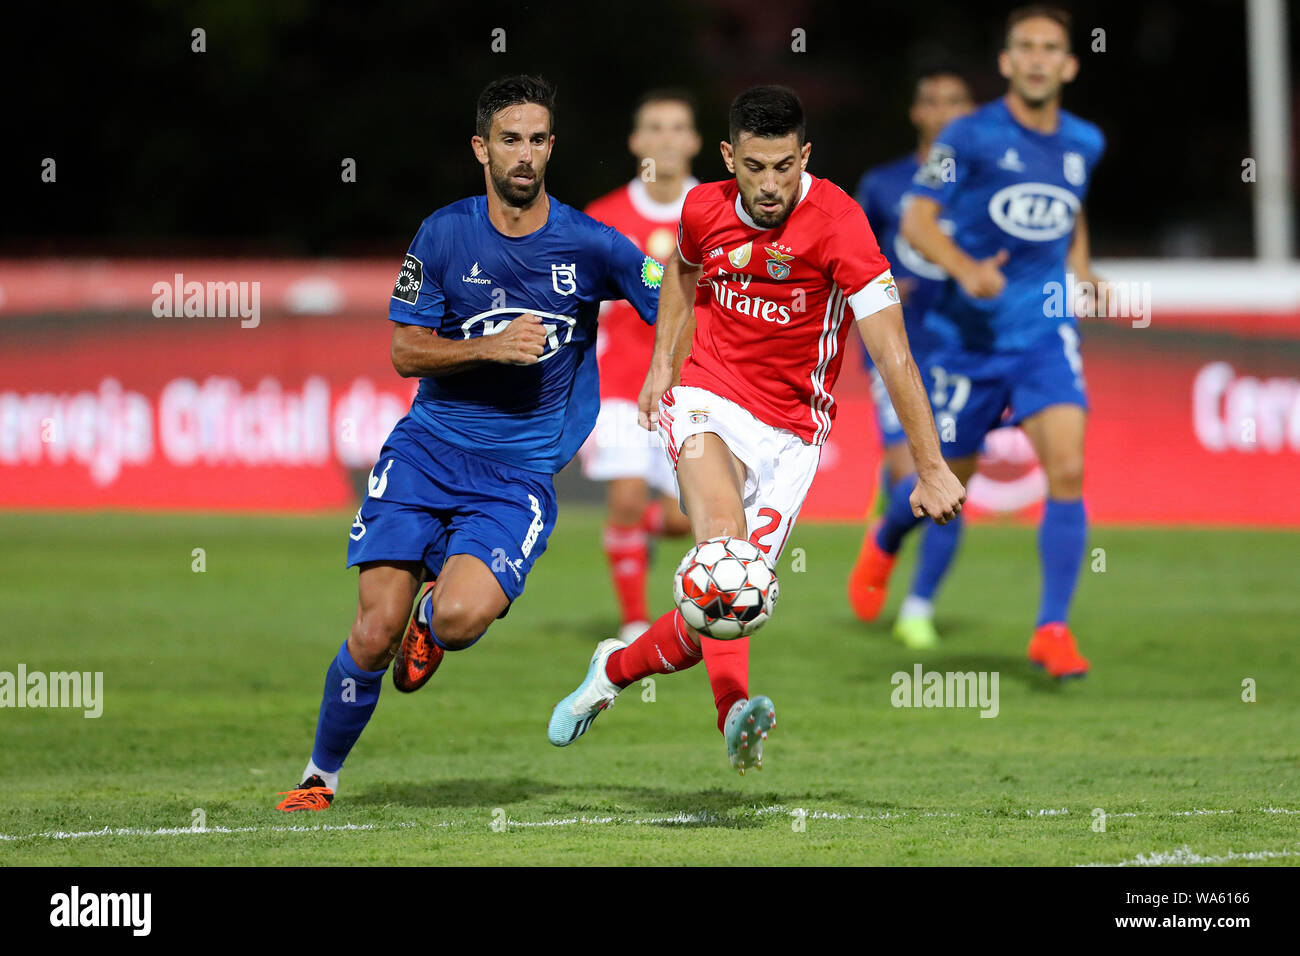 Nuno Coelho Of Belenenses Sad L And Pizzi Of Sl Benfica R Are Seen In Action During The League Nos 2019 20 Football Match Between Belenenses Sad And Sl Benfica Final Score Belenenses Sad [ 956 x 1300 Pixel ]